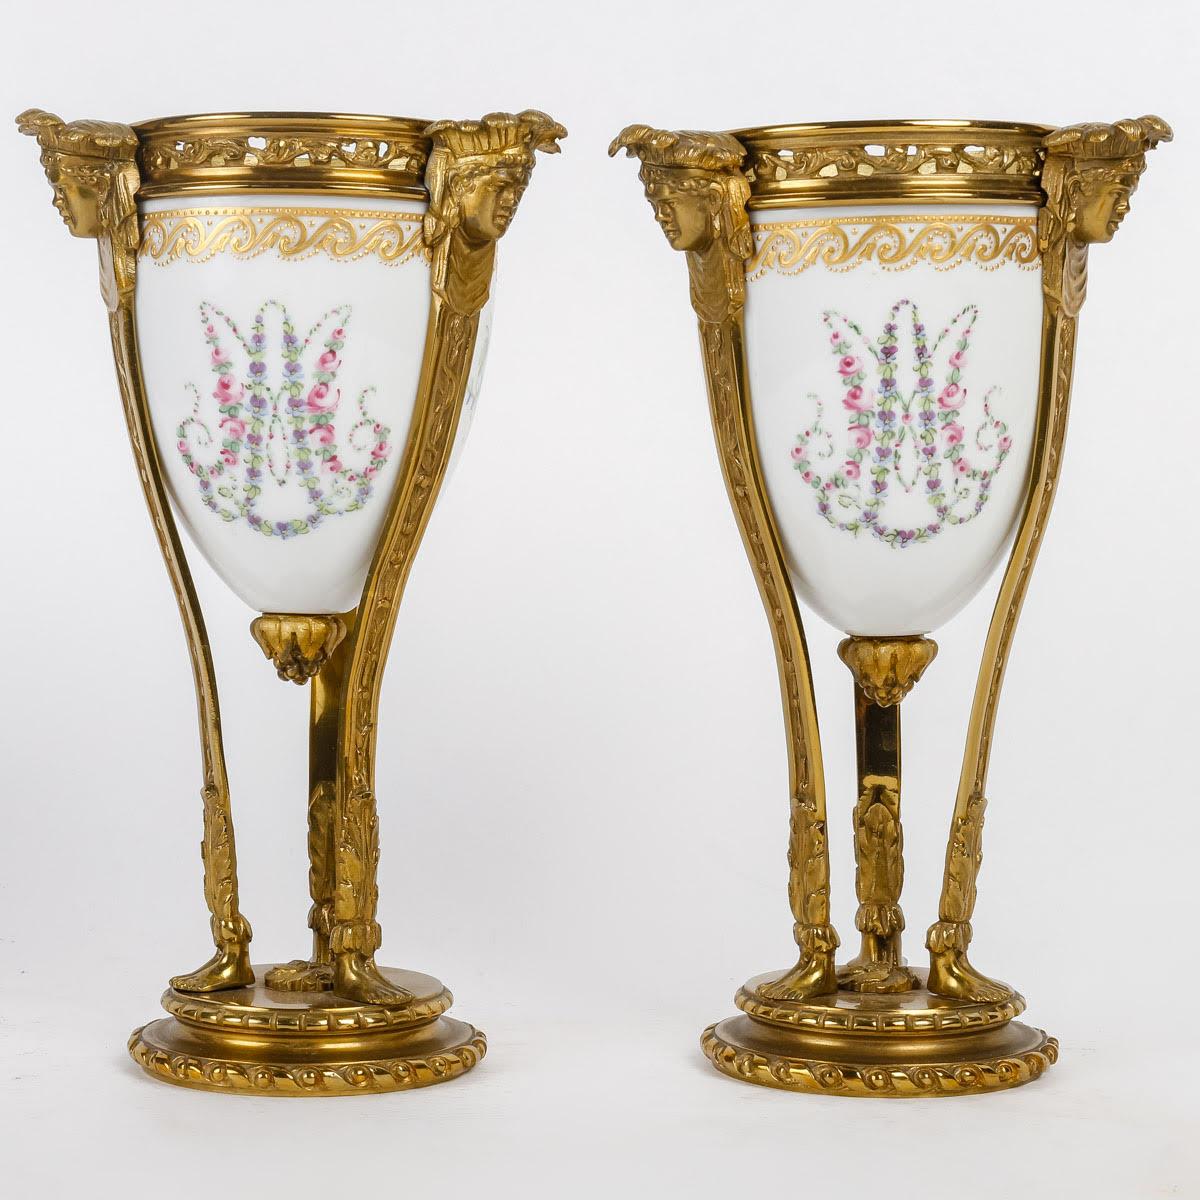 Pair of Perfume Burners from the Manufacture de Sèvres, Early 20th Century. For Sale 1